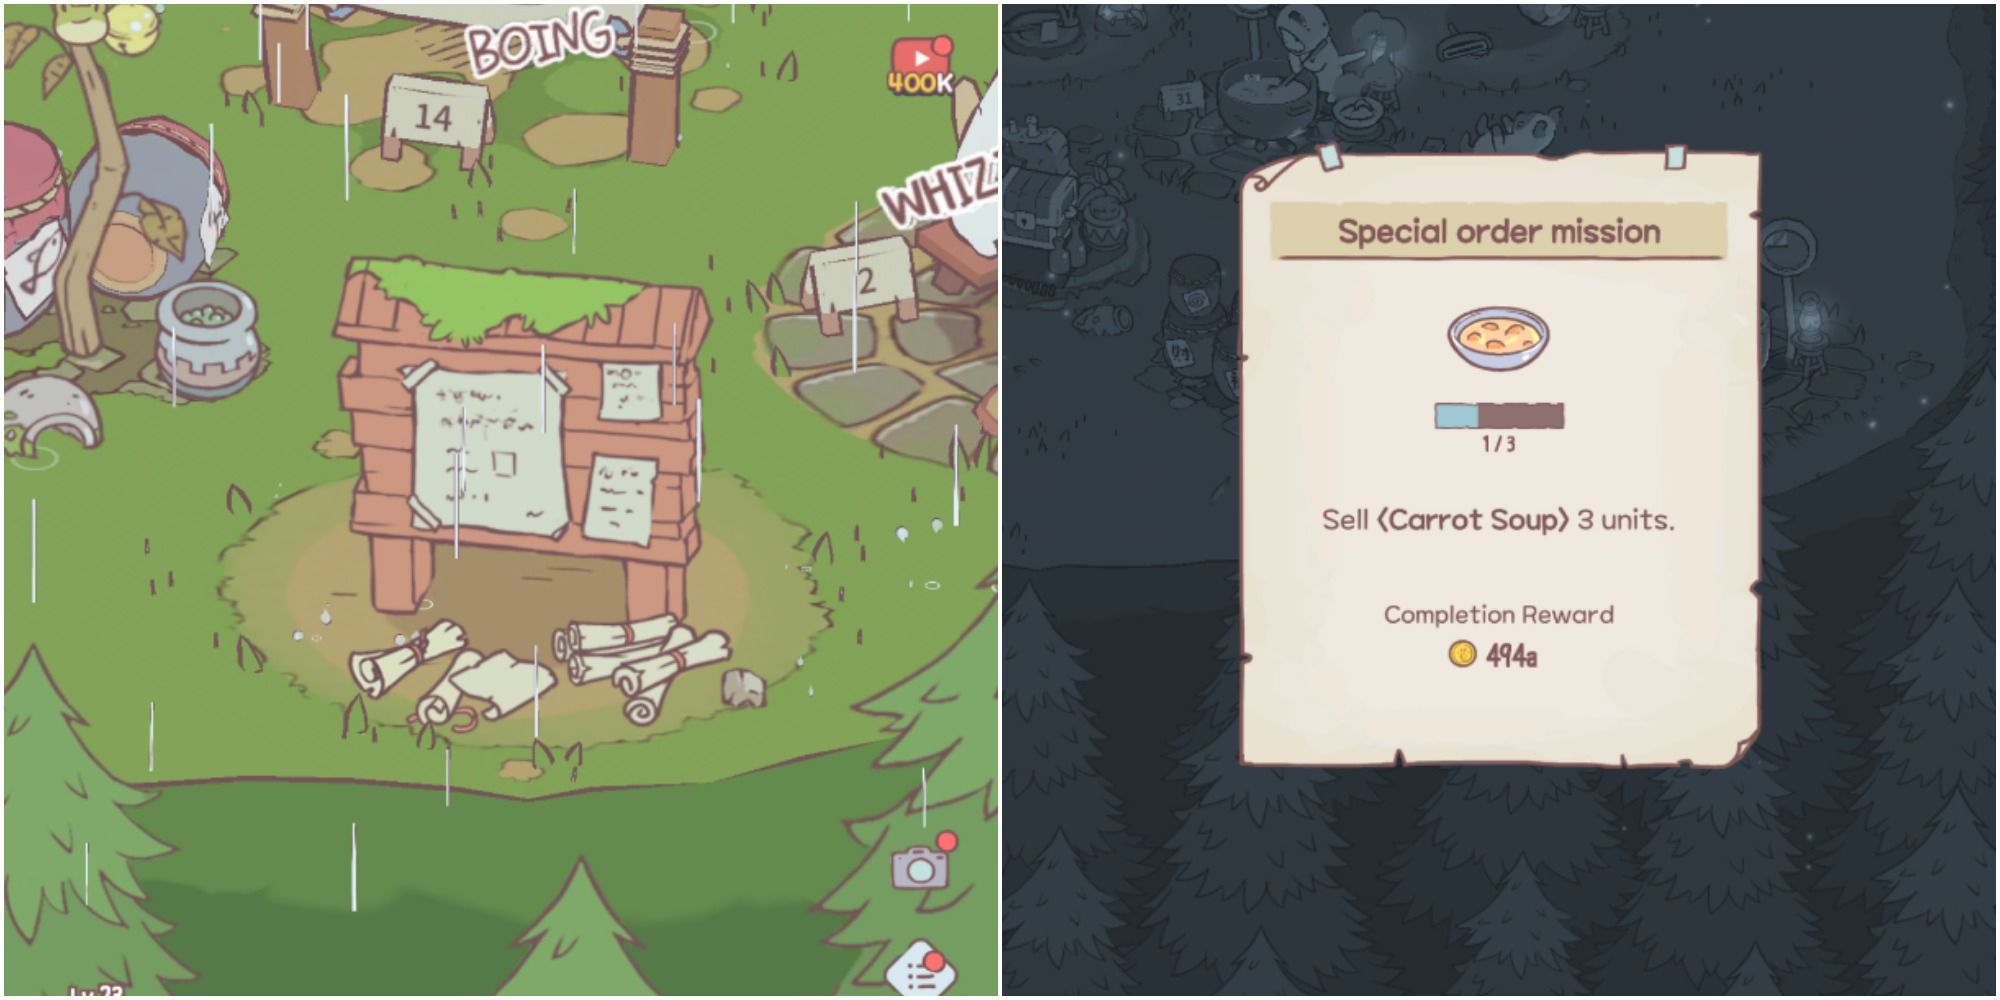 Split image of bulletin board in the rain and a special order mission page for carrot soup